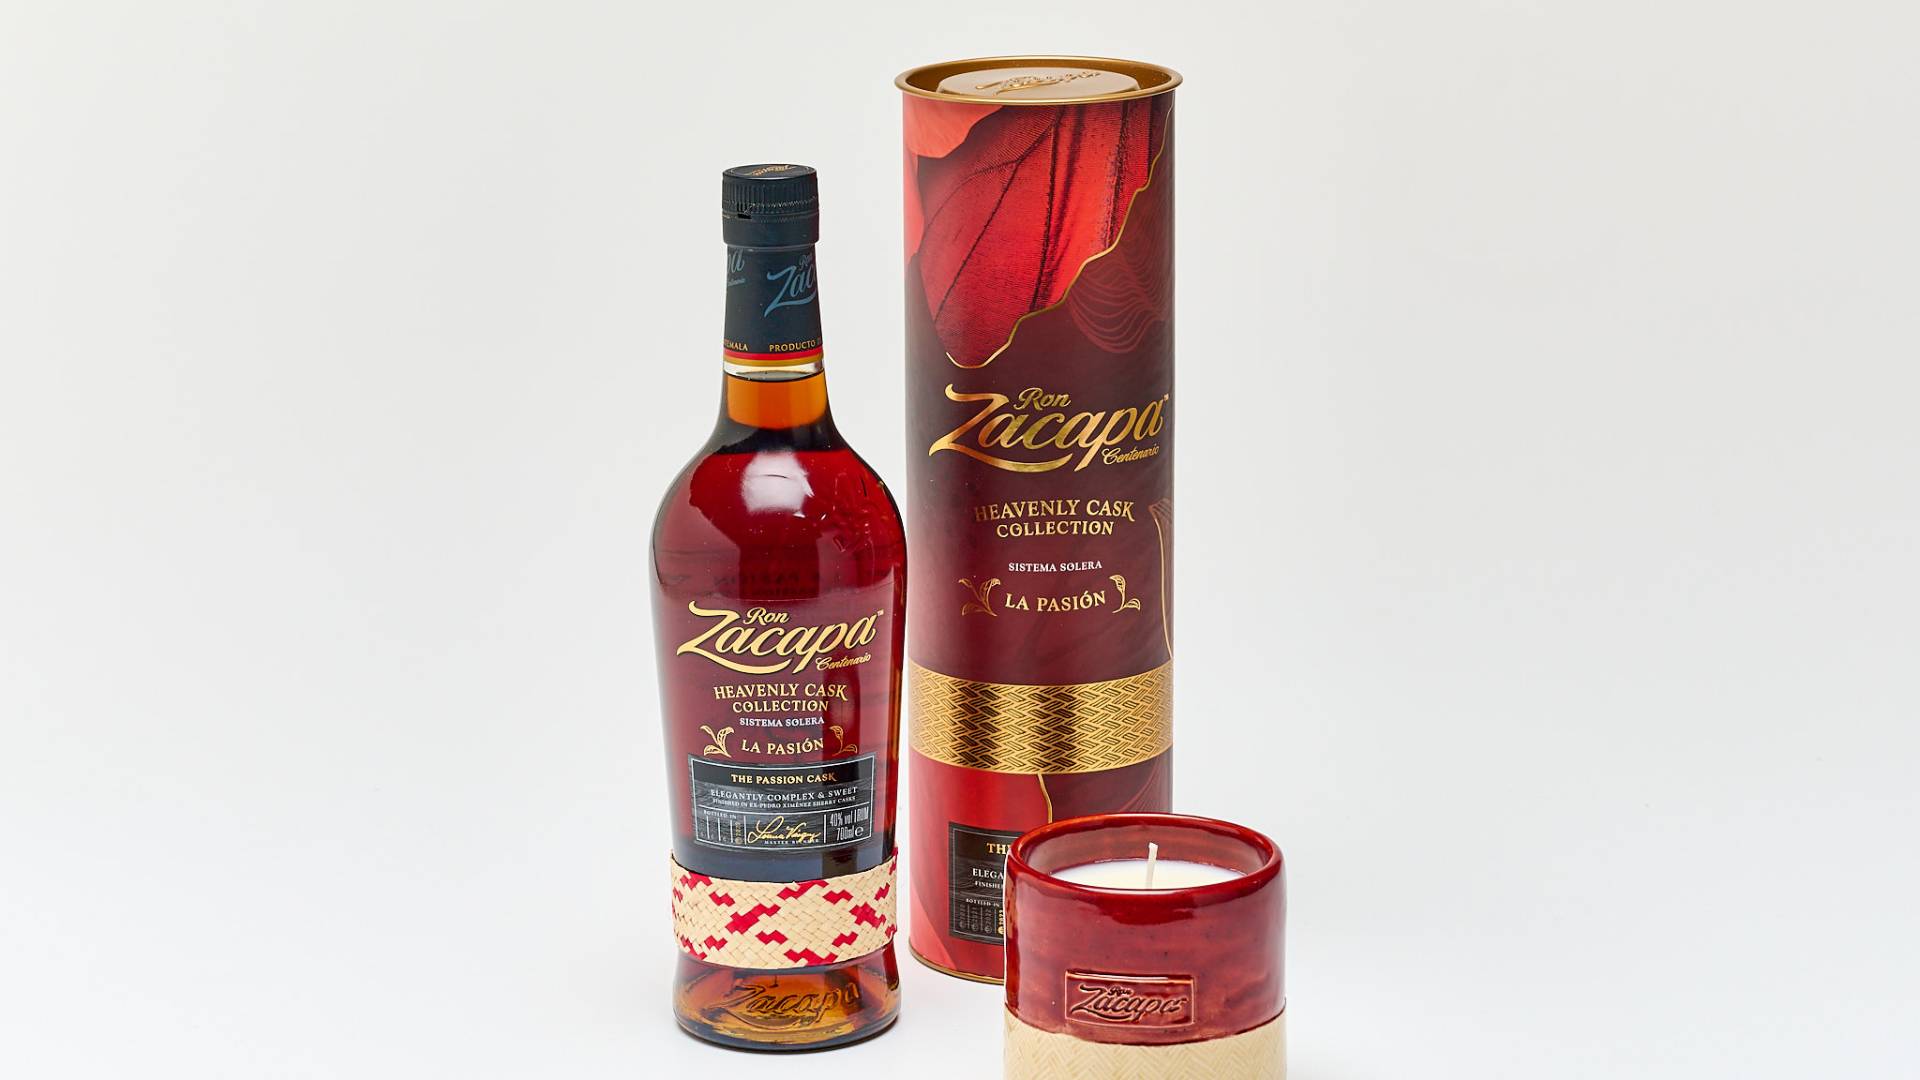 zacapa-the-passion-cask-pack-robb-report-italia